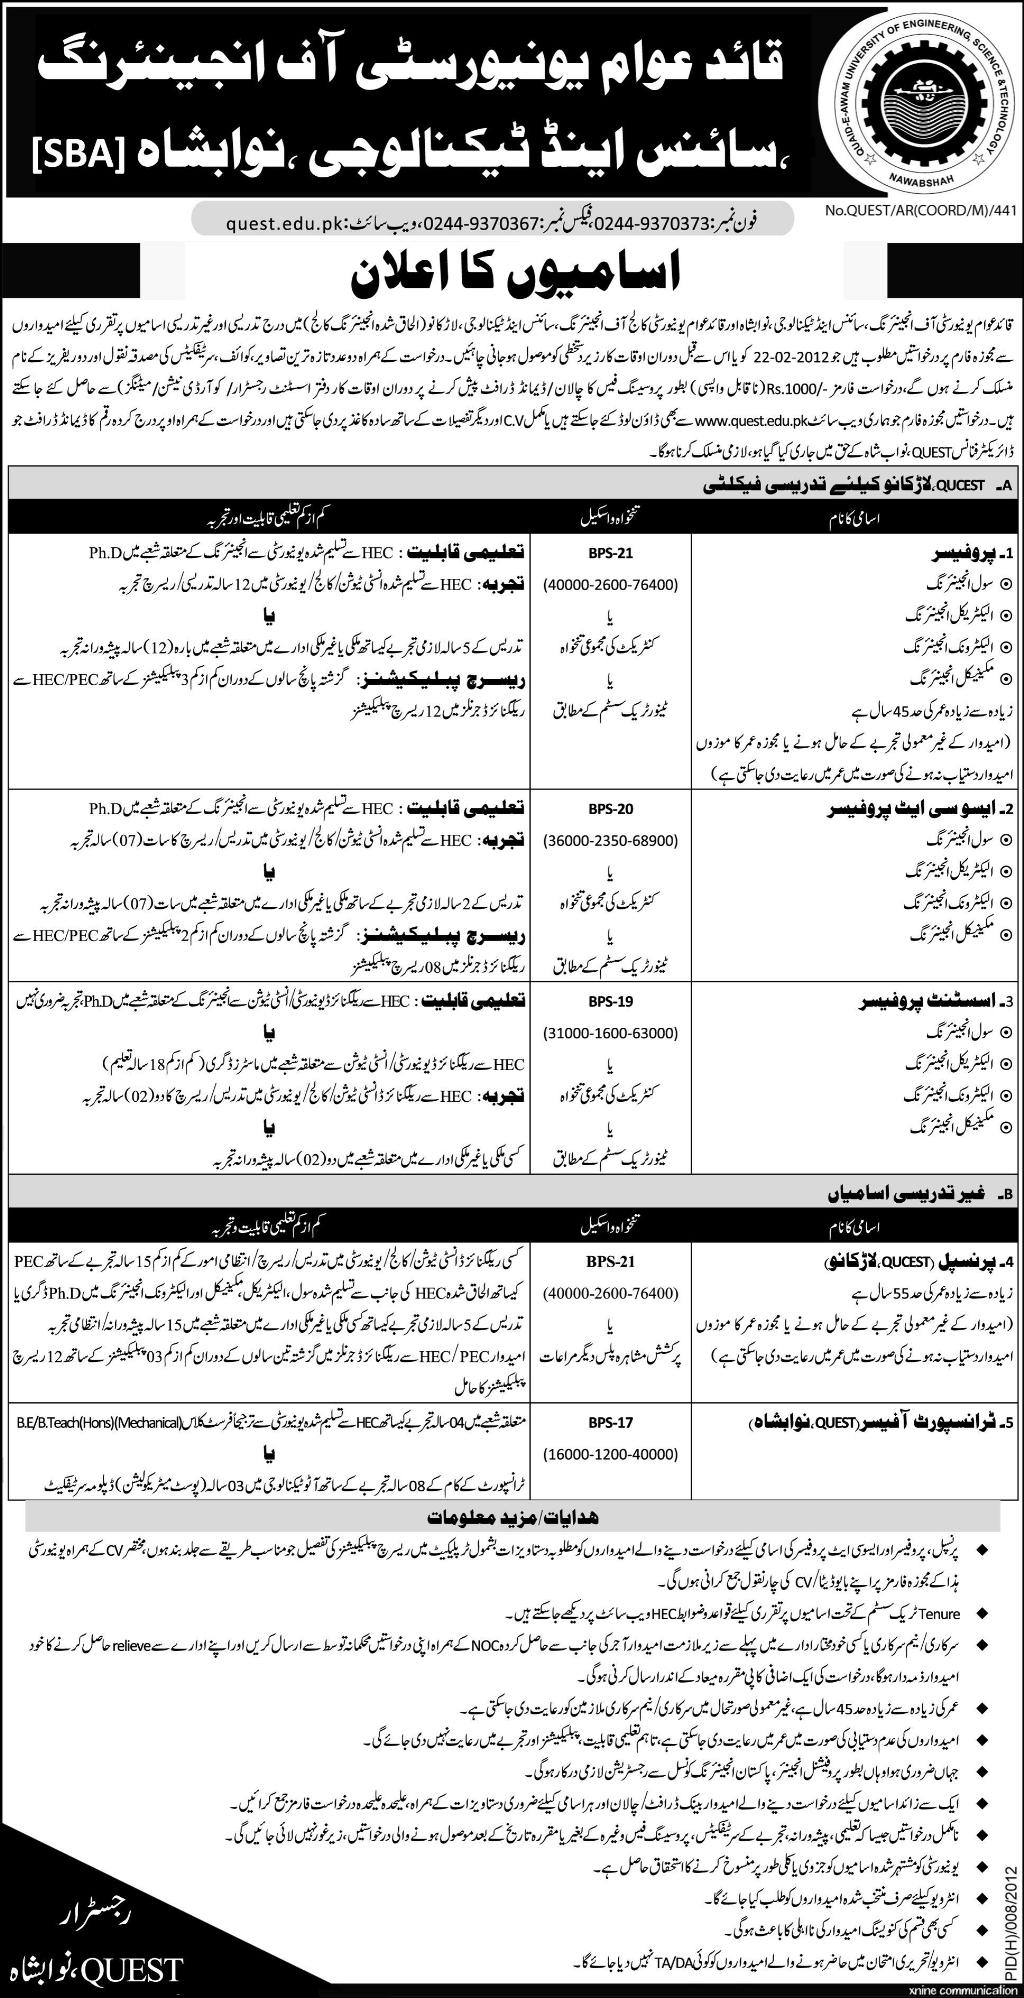 Quaid e Awam University of Engineering, Science and Technology, Nawabshah. Jobs Opportunity